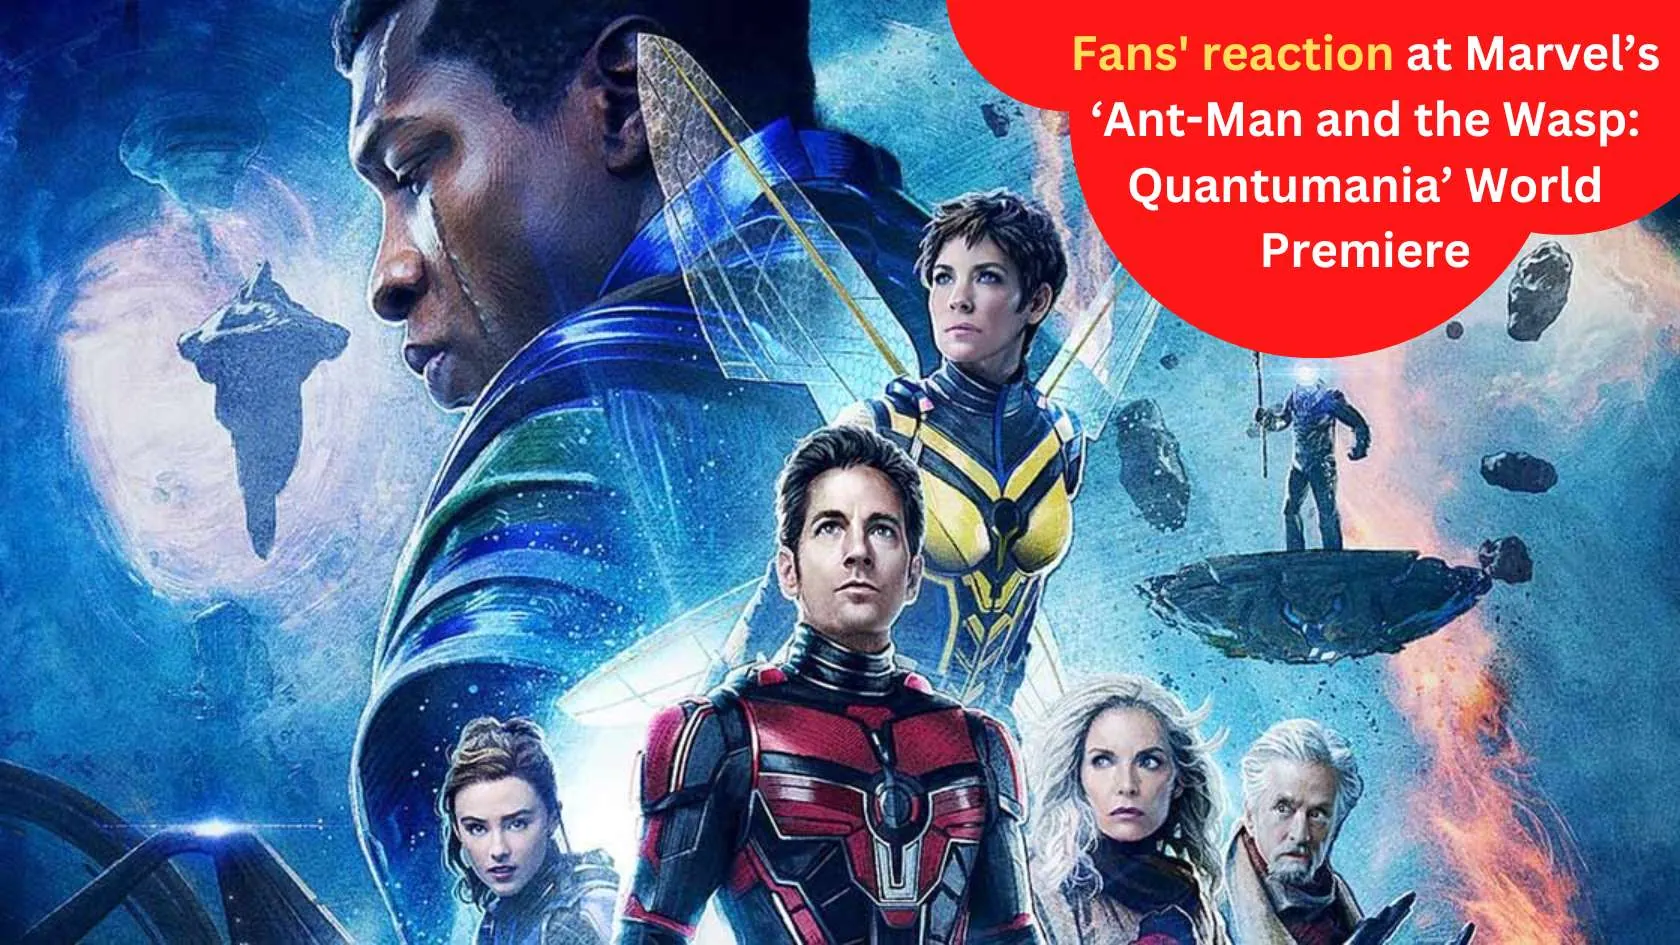 Fans' reaction at Marvel’s ‘Ant-Man and the Wasp: Quantumania’ World Premiere